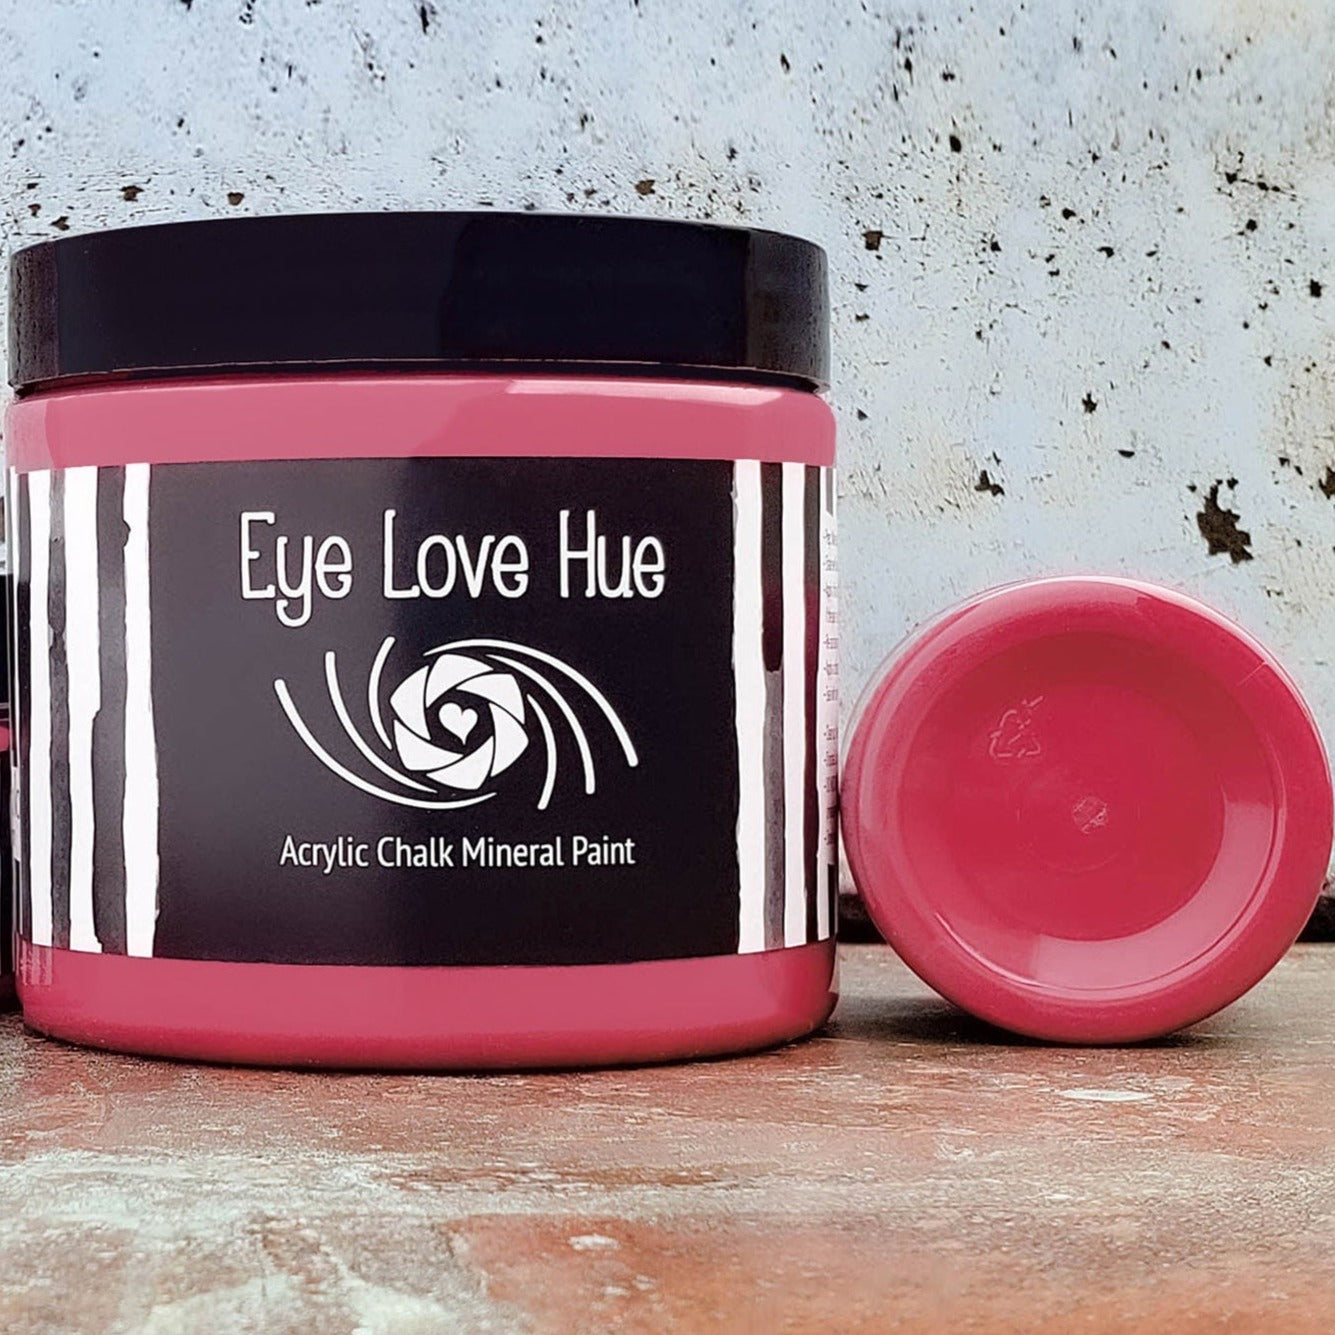 Eye Love Hue Paint & Products Pucker Up Pink Acrylic Mineral Paint Chalk Paint Clay Paint